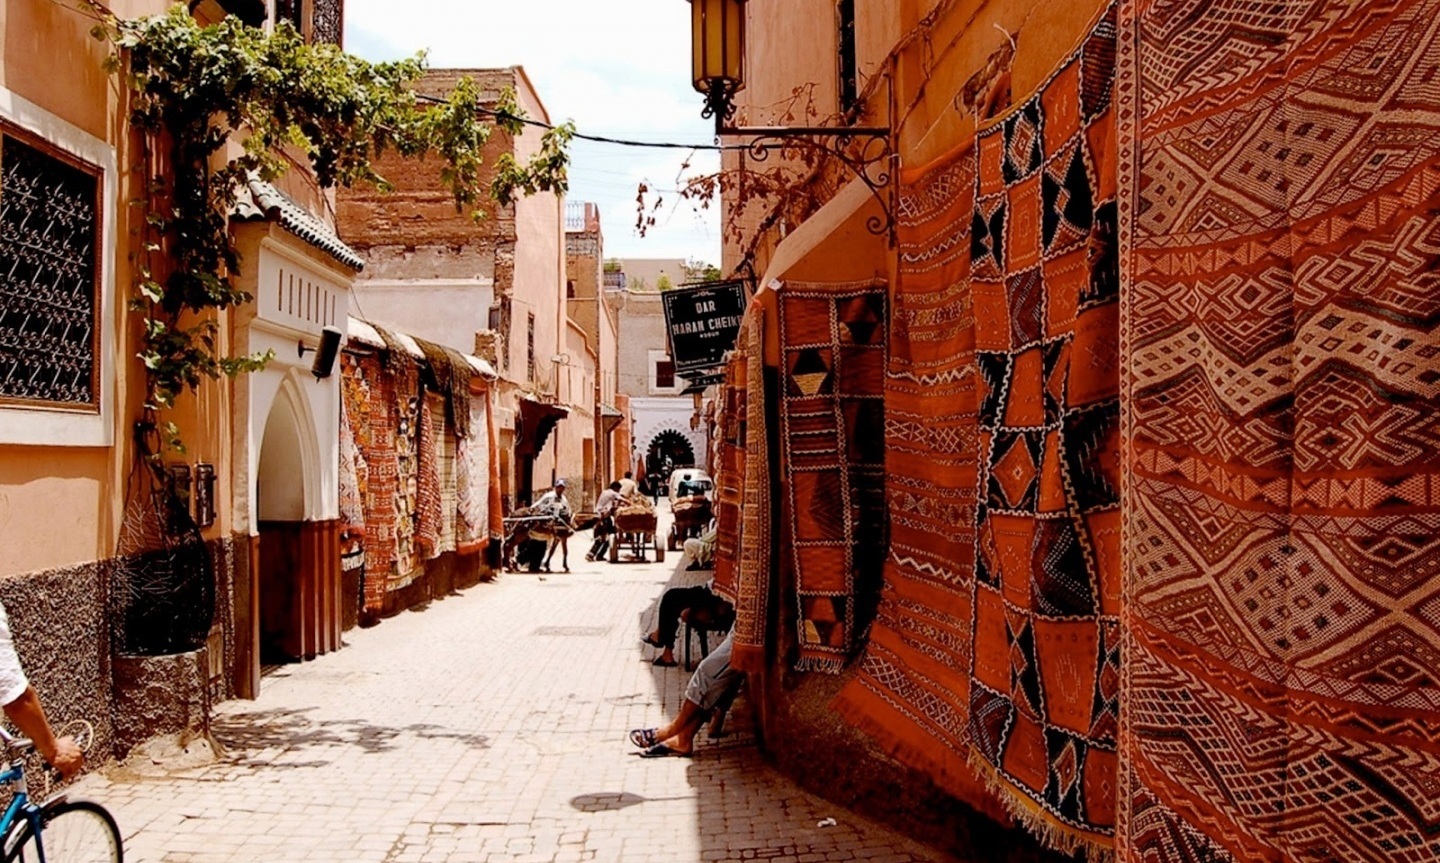 Morocco! A trip of experience and helping others 